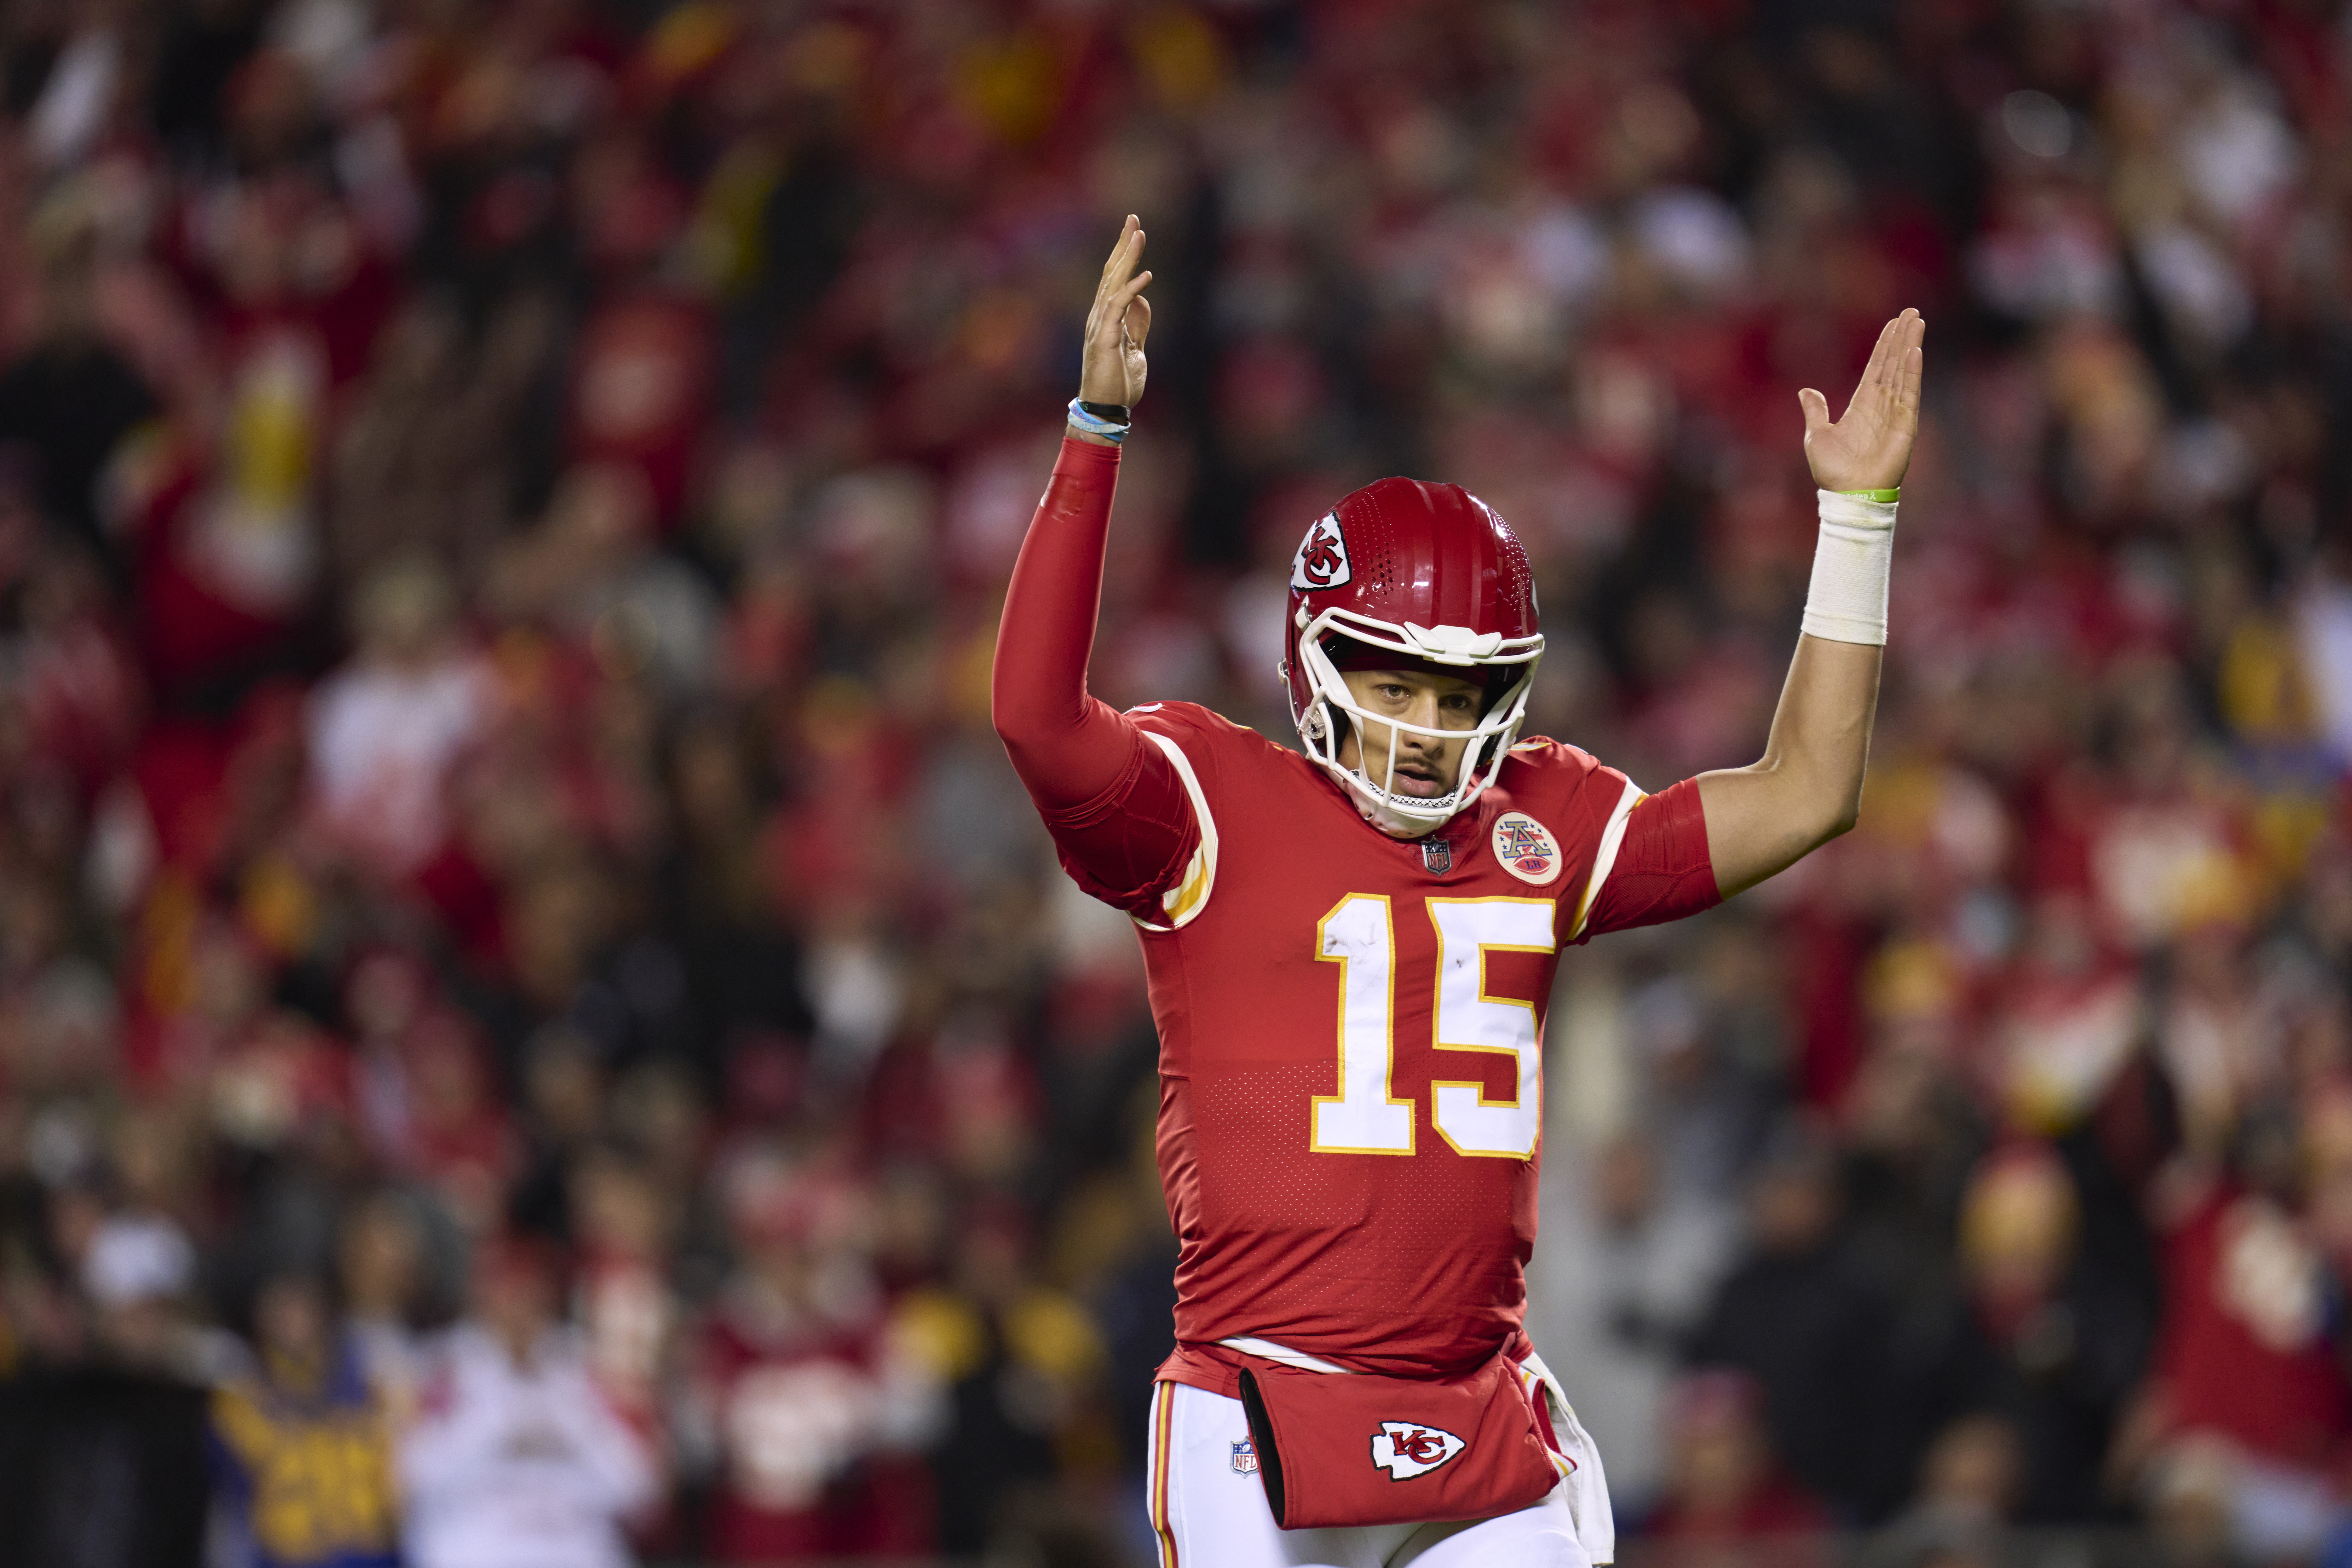 Patrick Mahomes #15 of the Kansas City Chiefs celebrates after scoring a touchdown against the Los Angeles Rams during the second half at GEHA Field at Arrowhead Stadium on November 27, 2022 in Kansas City, Missouri.